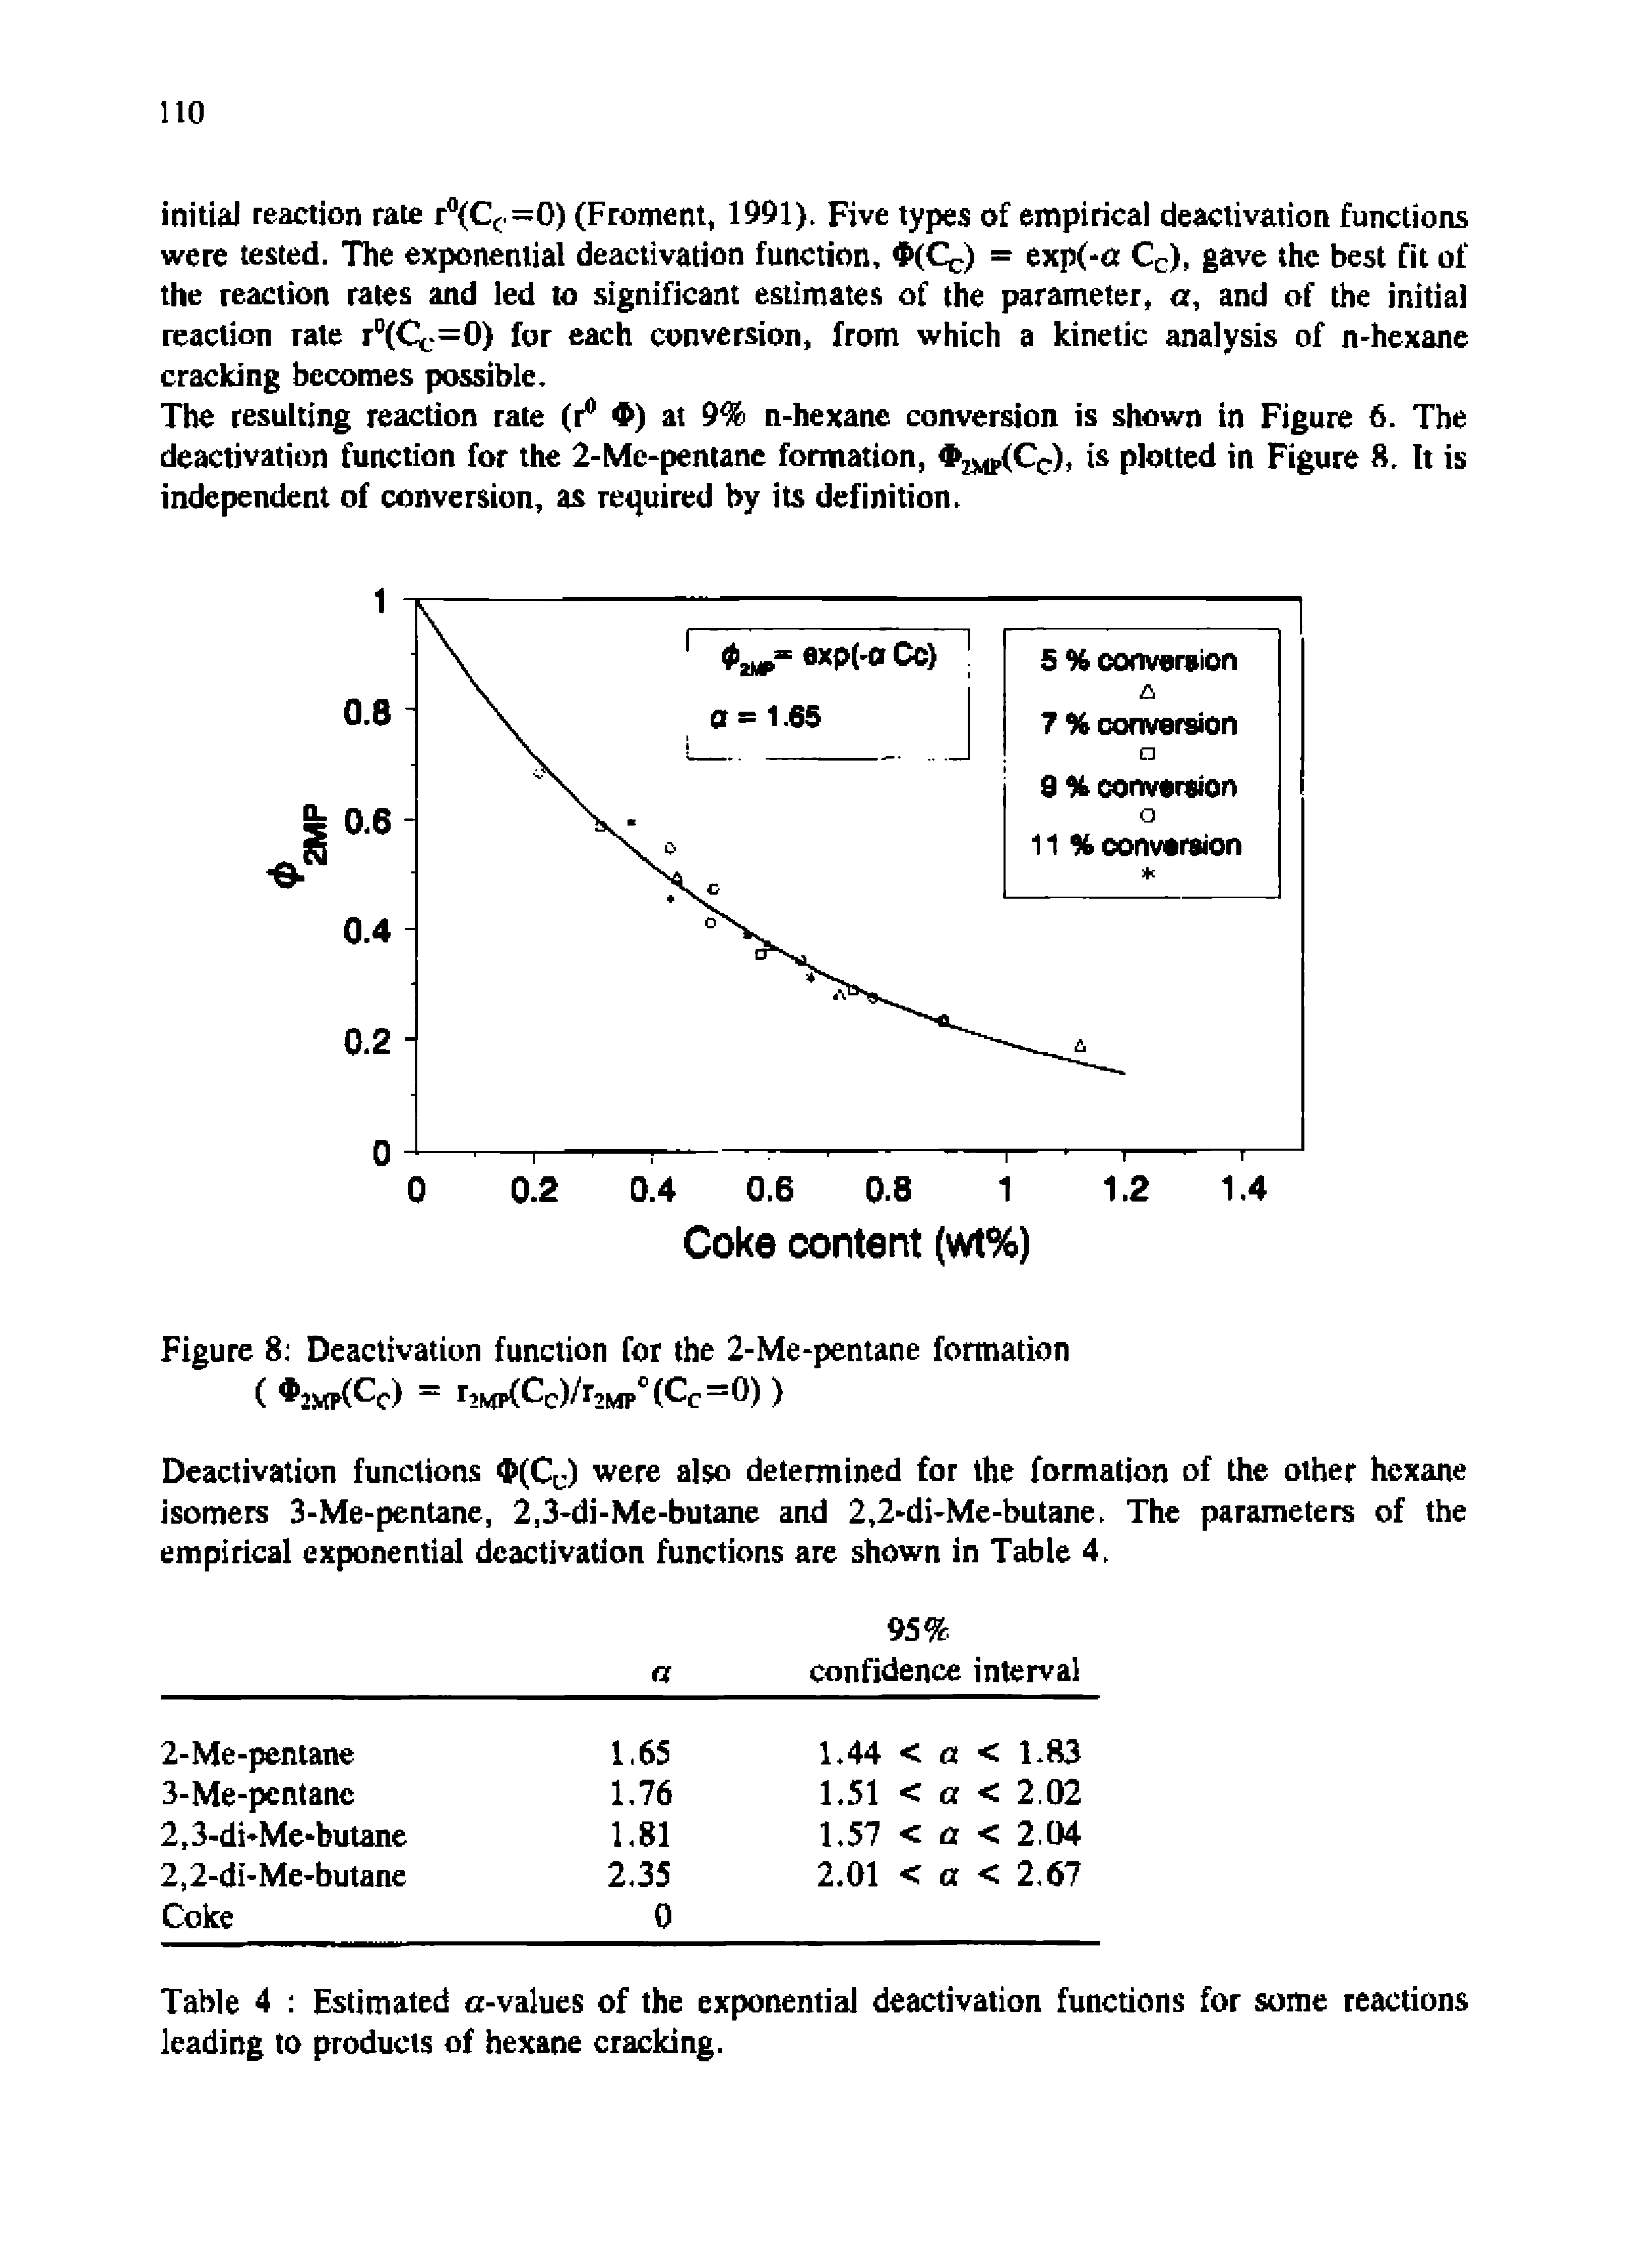 Table 4 Estimated a-values of the exponential deactivation functions for some reactions leading to products of hexane cracking.